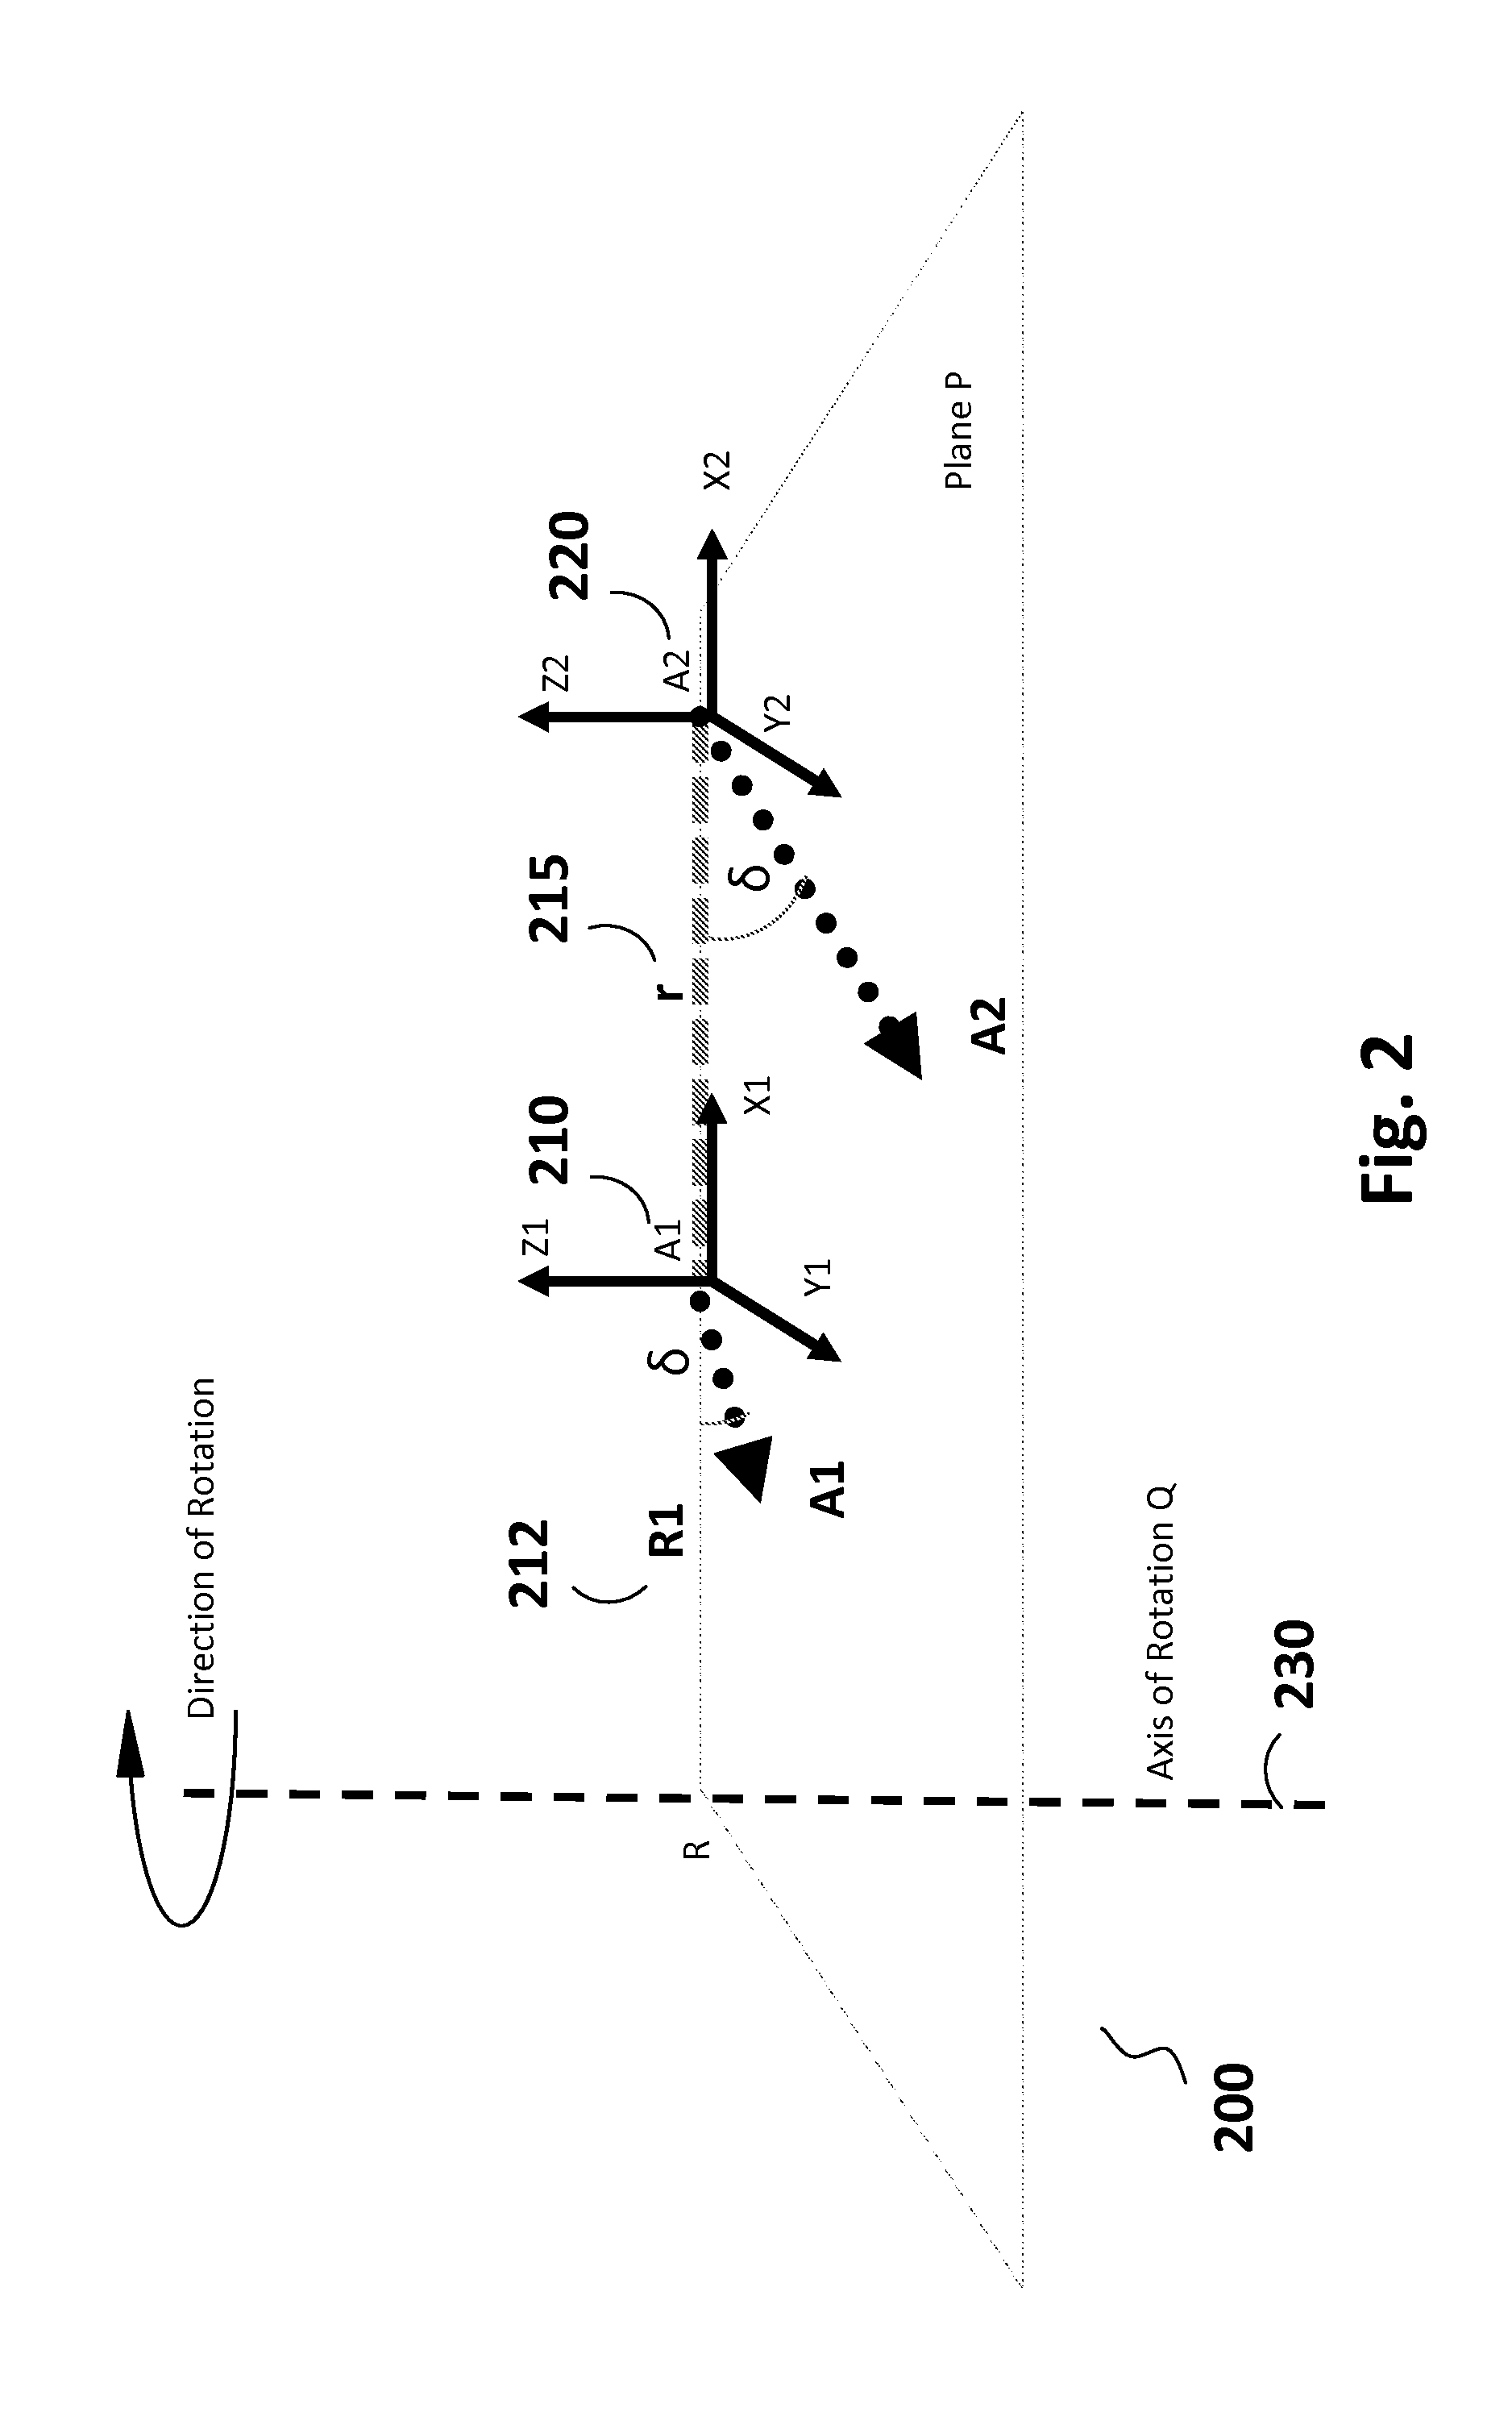 Force Sensing Apparatus and Method to Determine the Radius of Rotation of a Moving Object